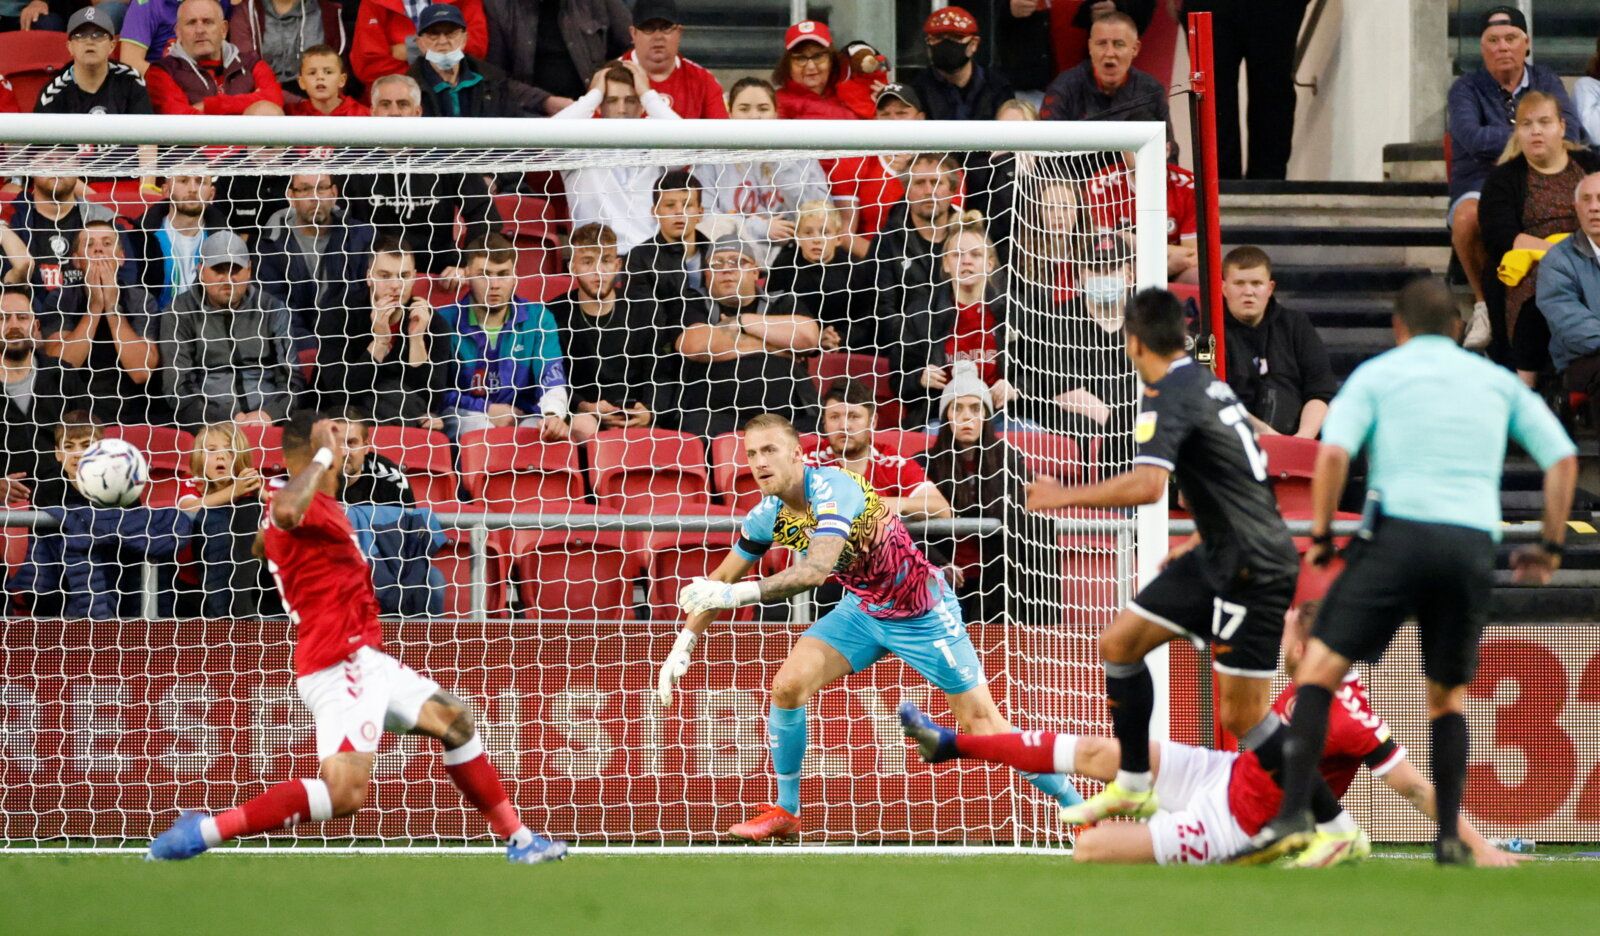 Soccer Football - Championship - Bristol City v Swansea City - Ashton Gate Stadium, Bristol, Britain - August 20, 2021  Swansea City's Joel Piroe scores their first goal  Action Images/John Sibley  EDITORIAL USE ONLY. No use with unauthorized audio, video, data, fixture lists, club/league logos or 